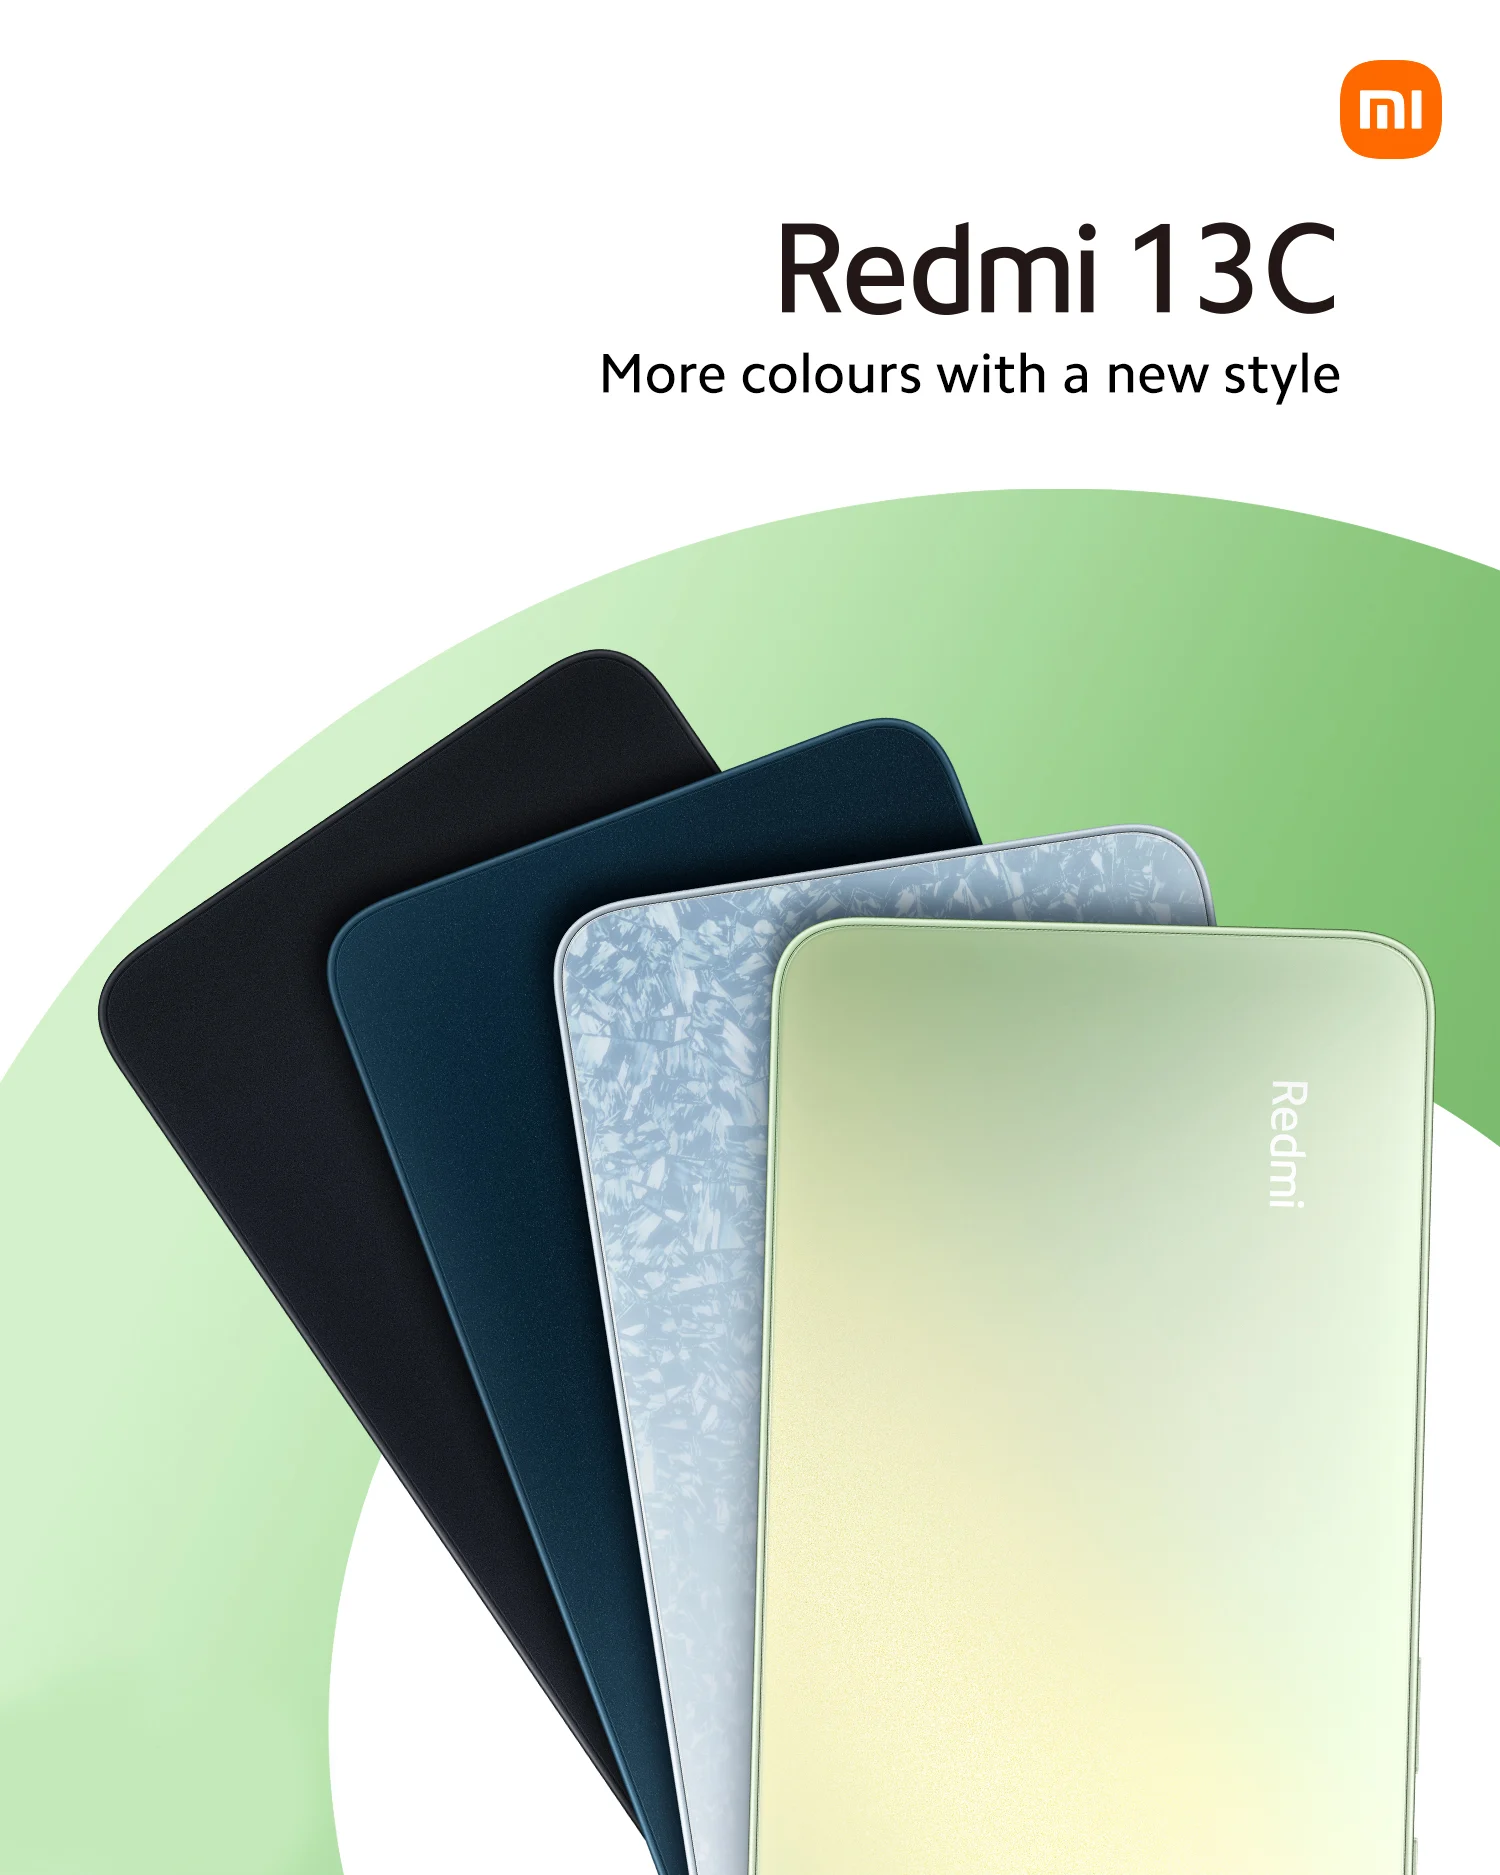 Promotional posters for Redmi 13C have been released